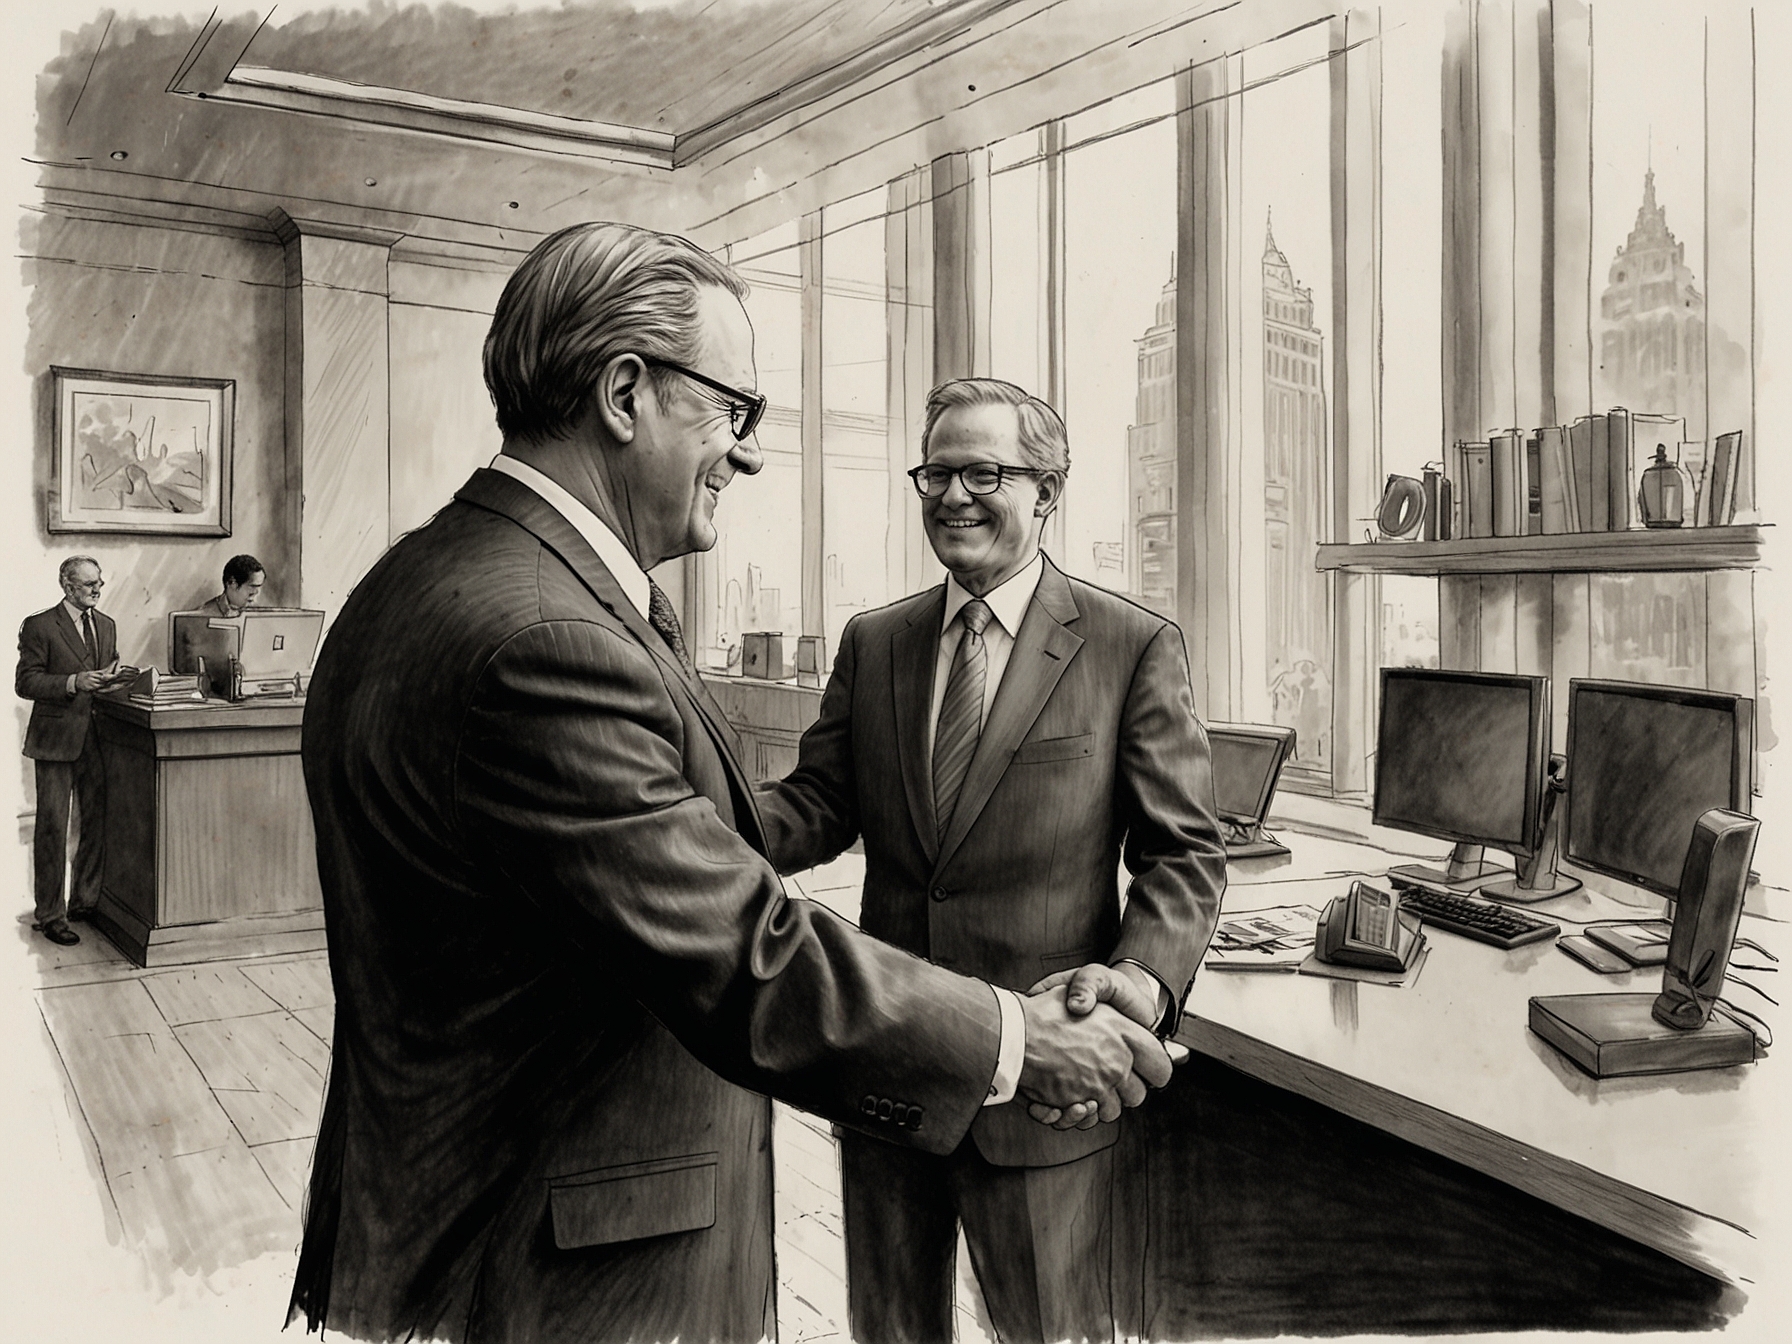 An illustration showing a handshake between executives of Fisher Investments and Advent International, symbolizing their new strategic partnership and mutual benefits.